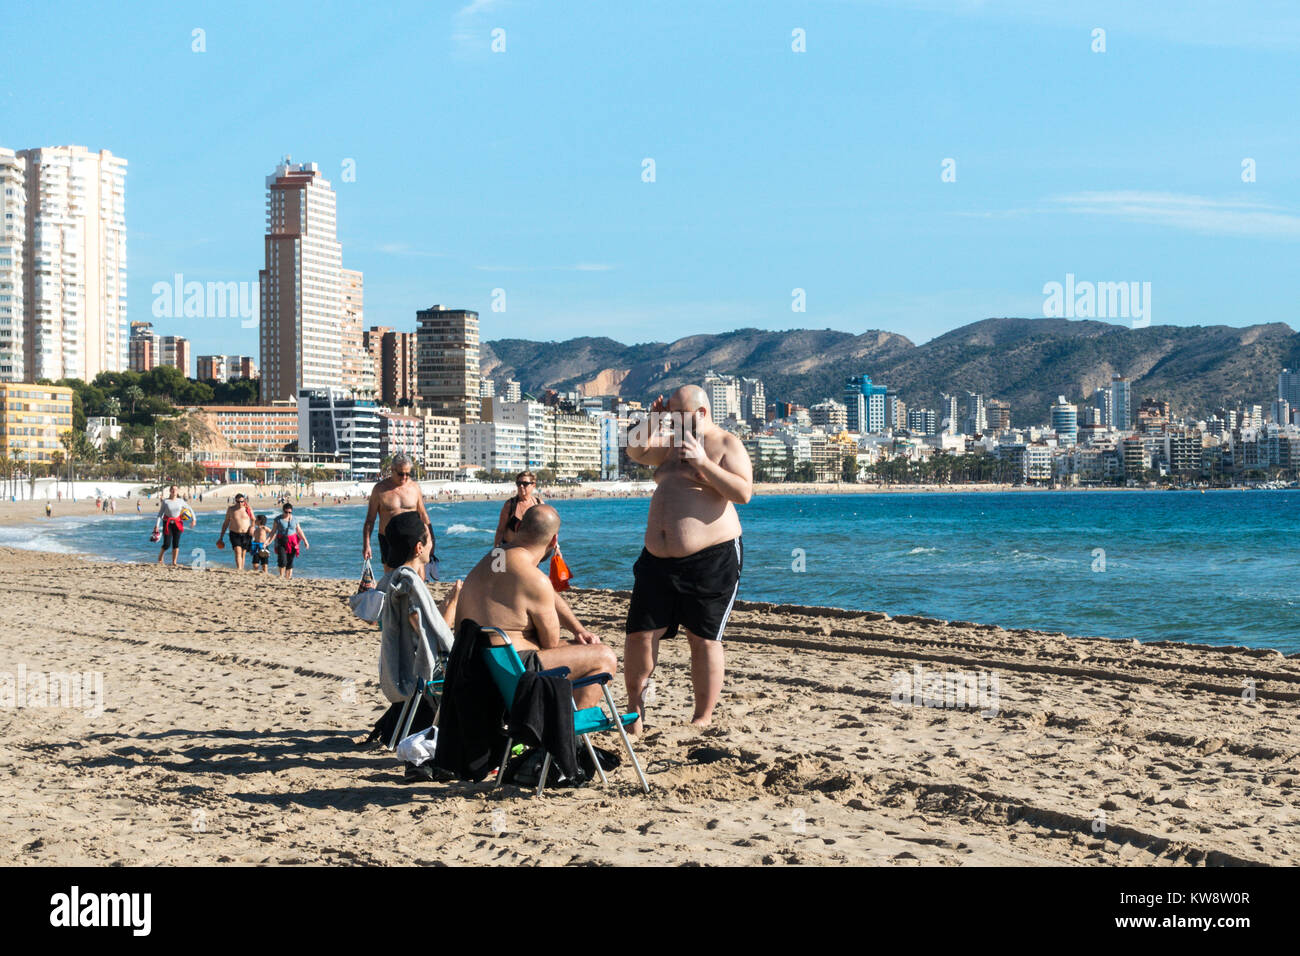 Poniente Beach, Benidorm, Costa Blanca, Spain, 30 December 2017. Blue skies and daytime temperatures reaching the mid 20's C draw the holiday crowds to this usually quiet part of Benidorm, whilst Britain freezes in minus temperatures, snow and ice. Credit: Mick Flynn/Alamy Live News Stock Photo